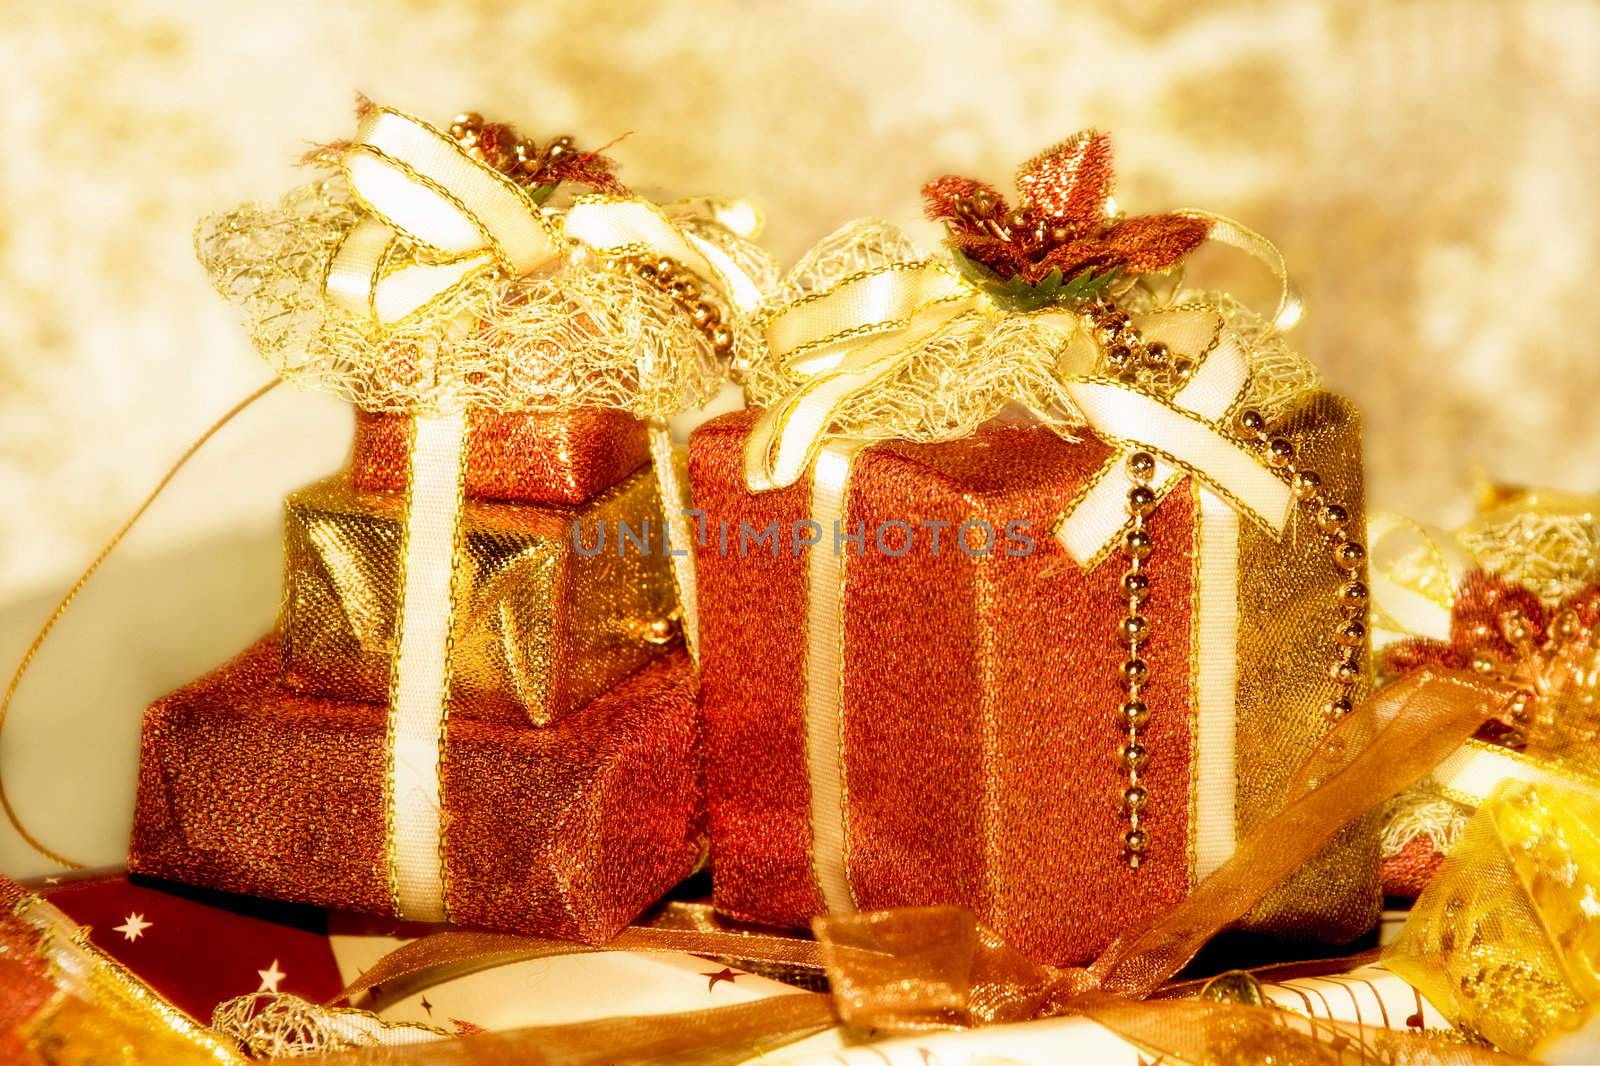 Golden gift boxe. Are tied up by tapes with bows